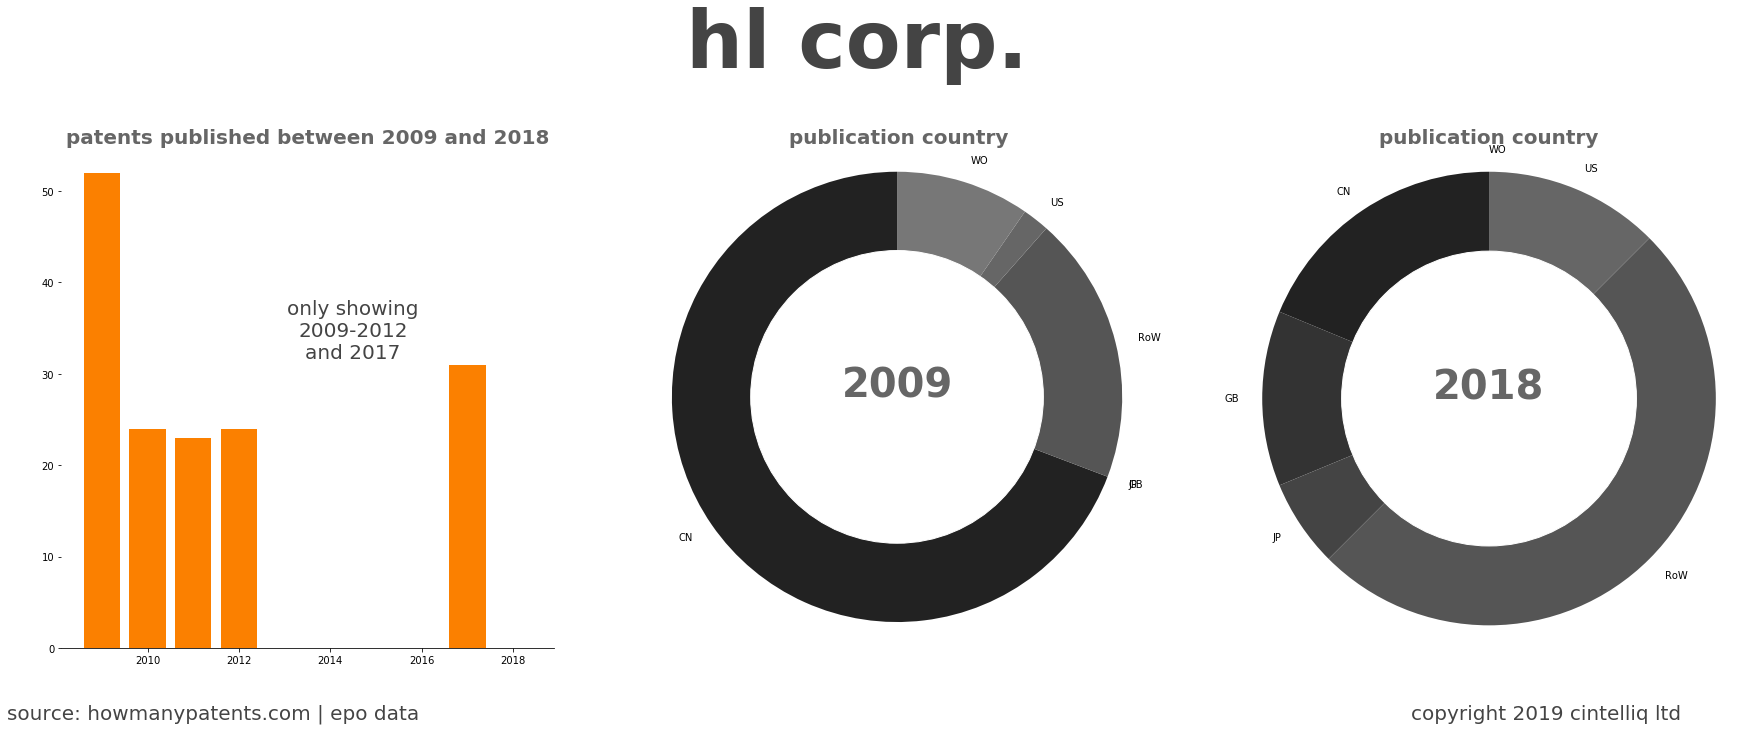 summary of patents for Hl Corp. 